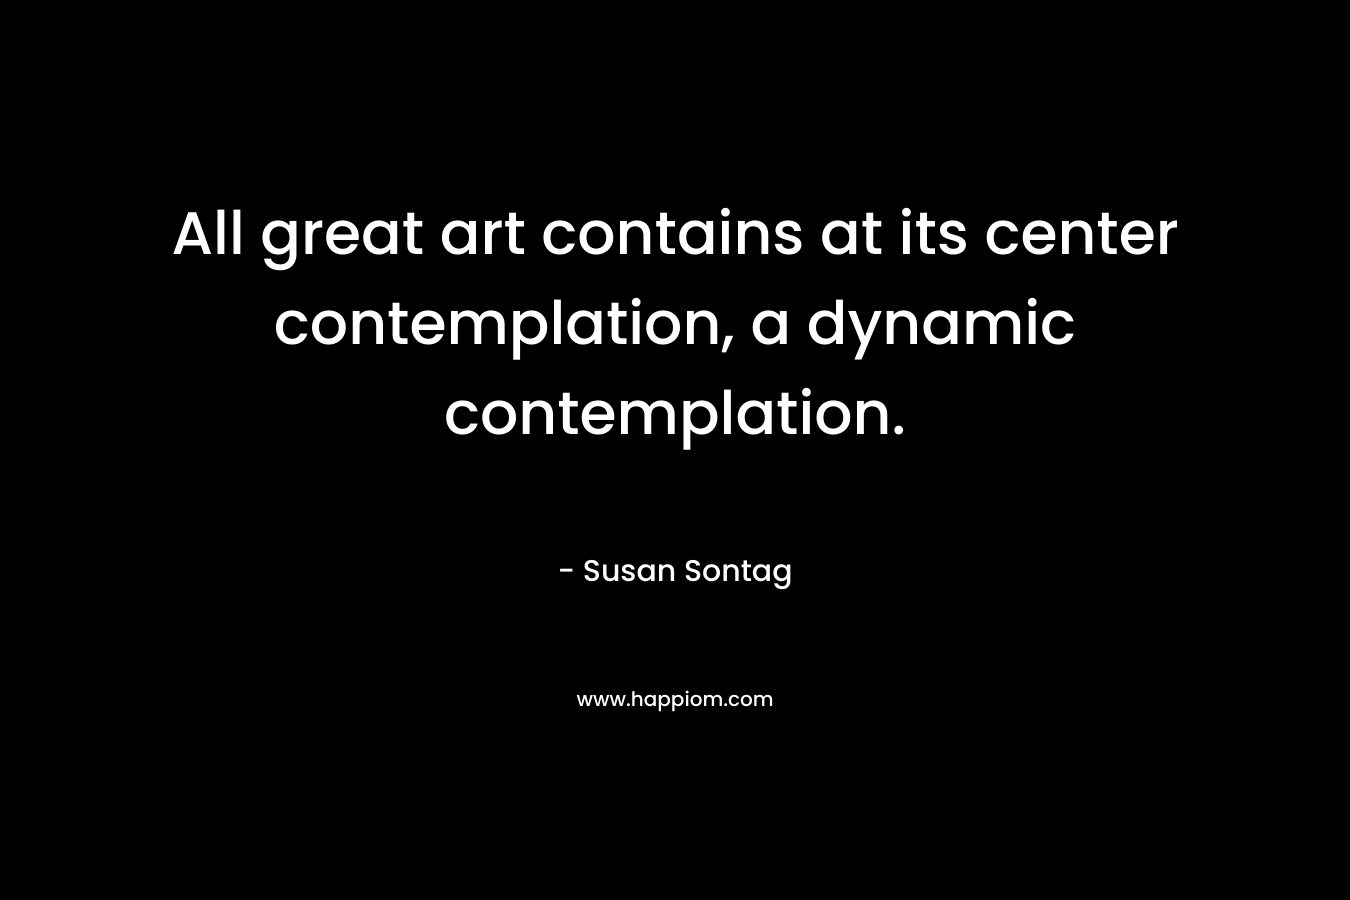 All great art contains at its center contemplation, a dynamic contemplation.